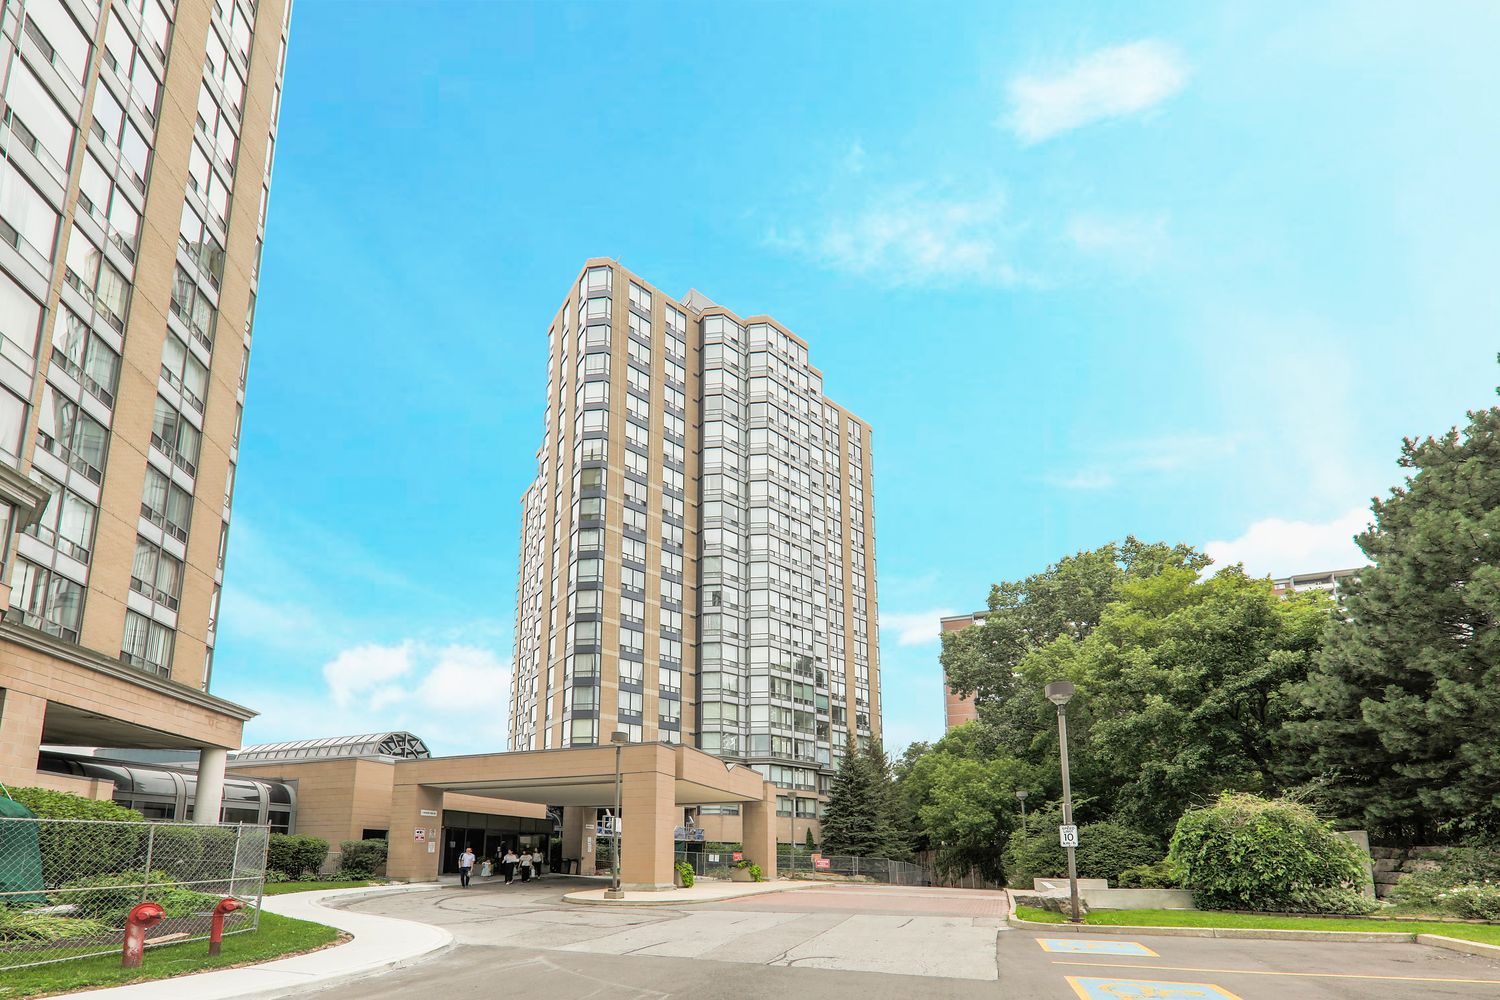 1 Hickory Tree Road. River Ridge is located in  York Crosstown, Toronto - image #1 of 6